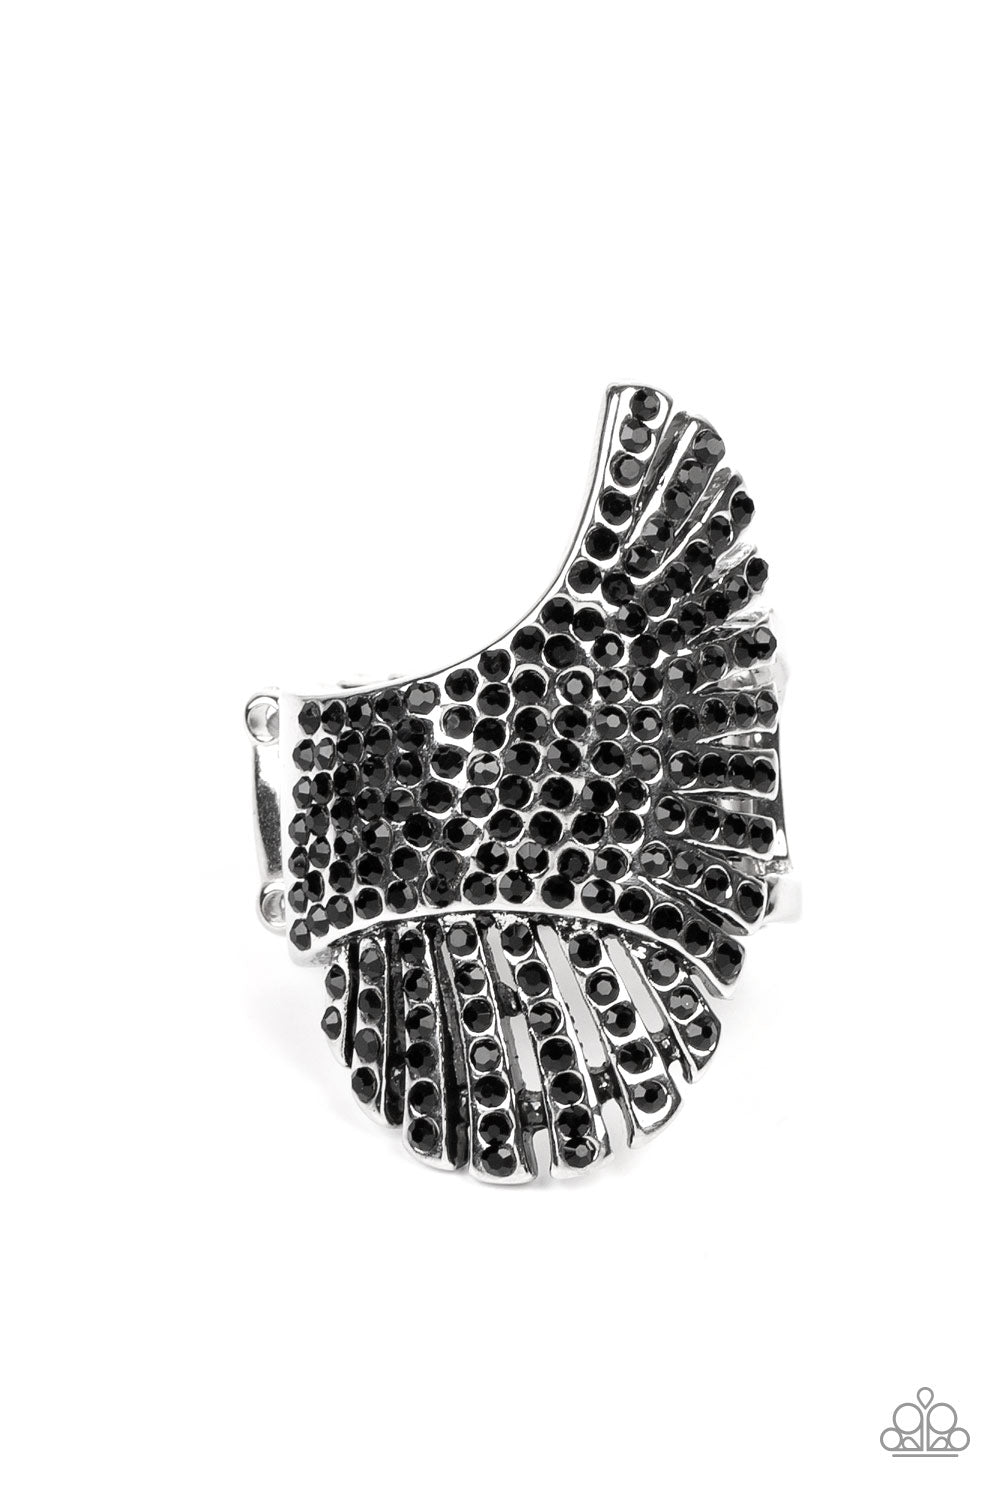 Express Your-SELFIE - Black Ring - Paparazzi Accessories - Dainty black rhinestones are sprinkled across pillared silver frames that asymmetrically overlap across the center of the finger, culminating into an expressive shimmer. Features a stretchy band for a flexible fit. Sold as one individual ring.